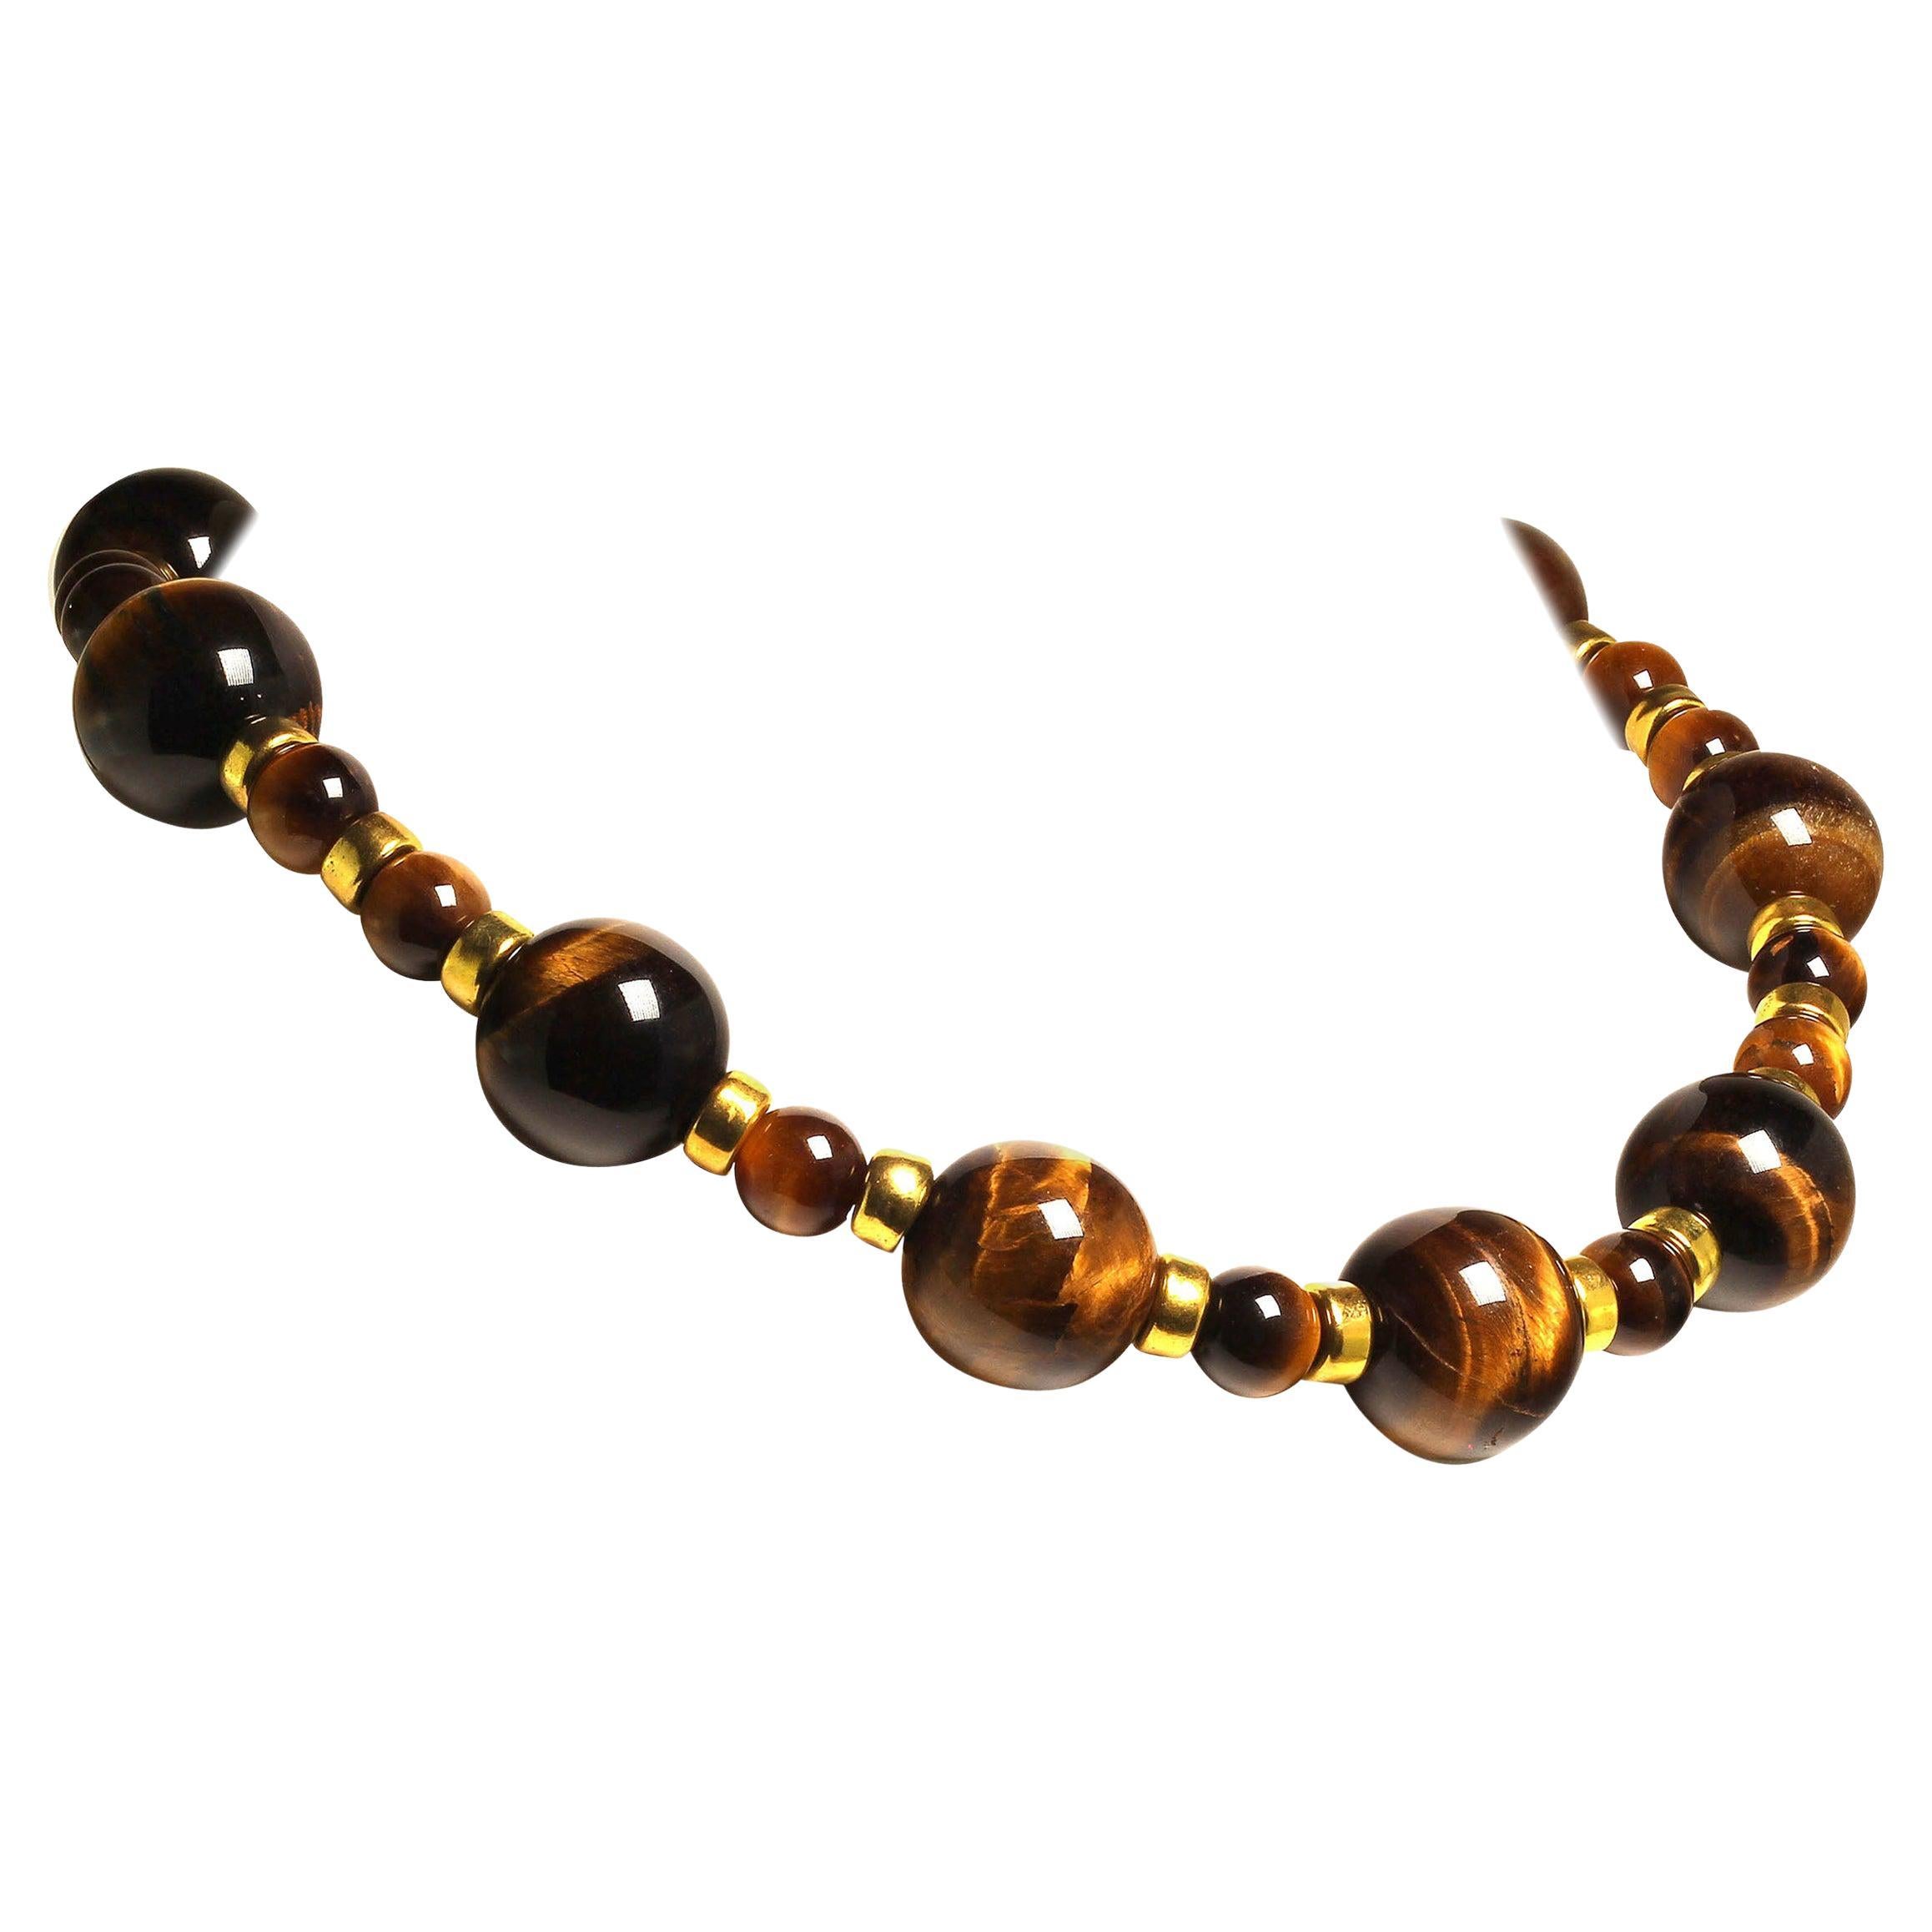 AJD Necklace of Two Sizes of Chatoyant Tiger’s Eye